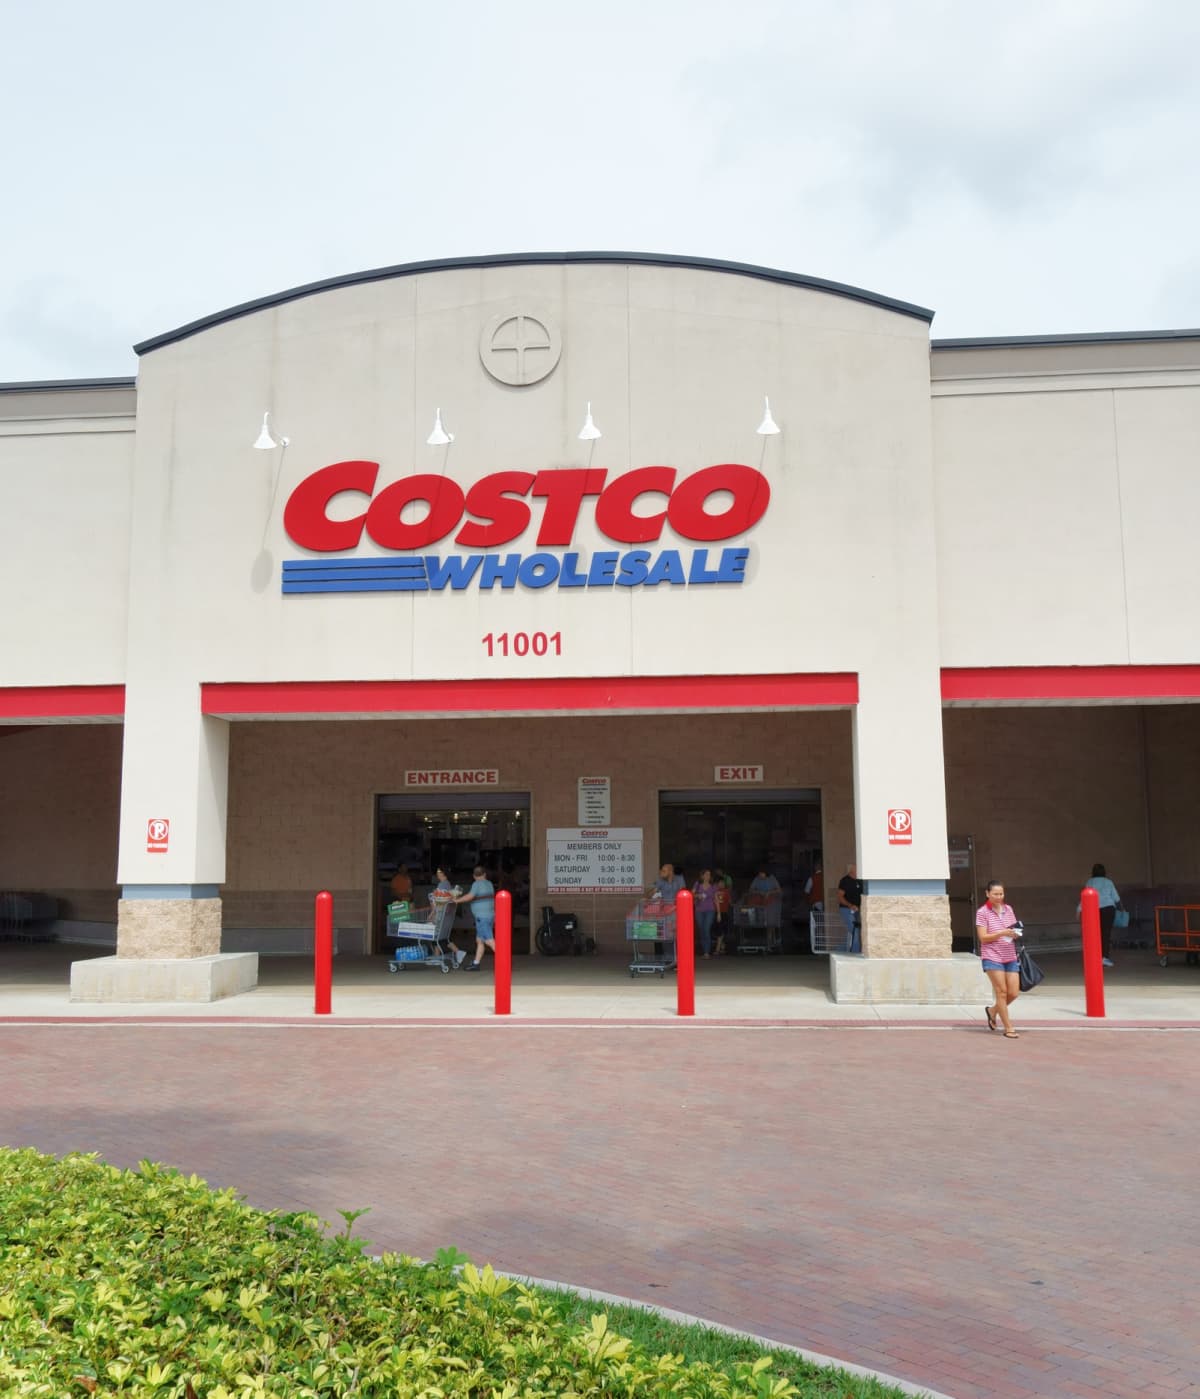 West Palm Beach, USA - April 18, 2014: A Costco Wholesale store in West Palm Beach, Florida. Costco is a combined department store and supermarket that sells in bulk and requires a club membership to shop. Customers are visible going in and out  of the store entrances. 